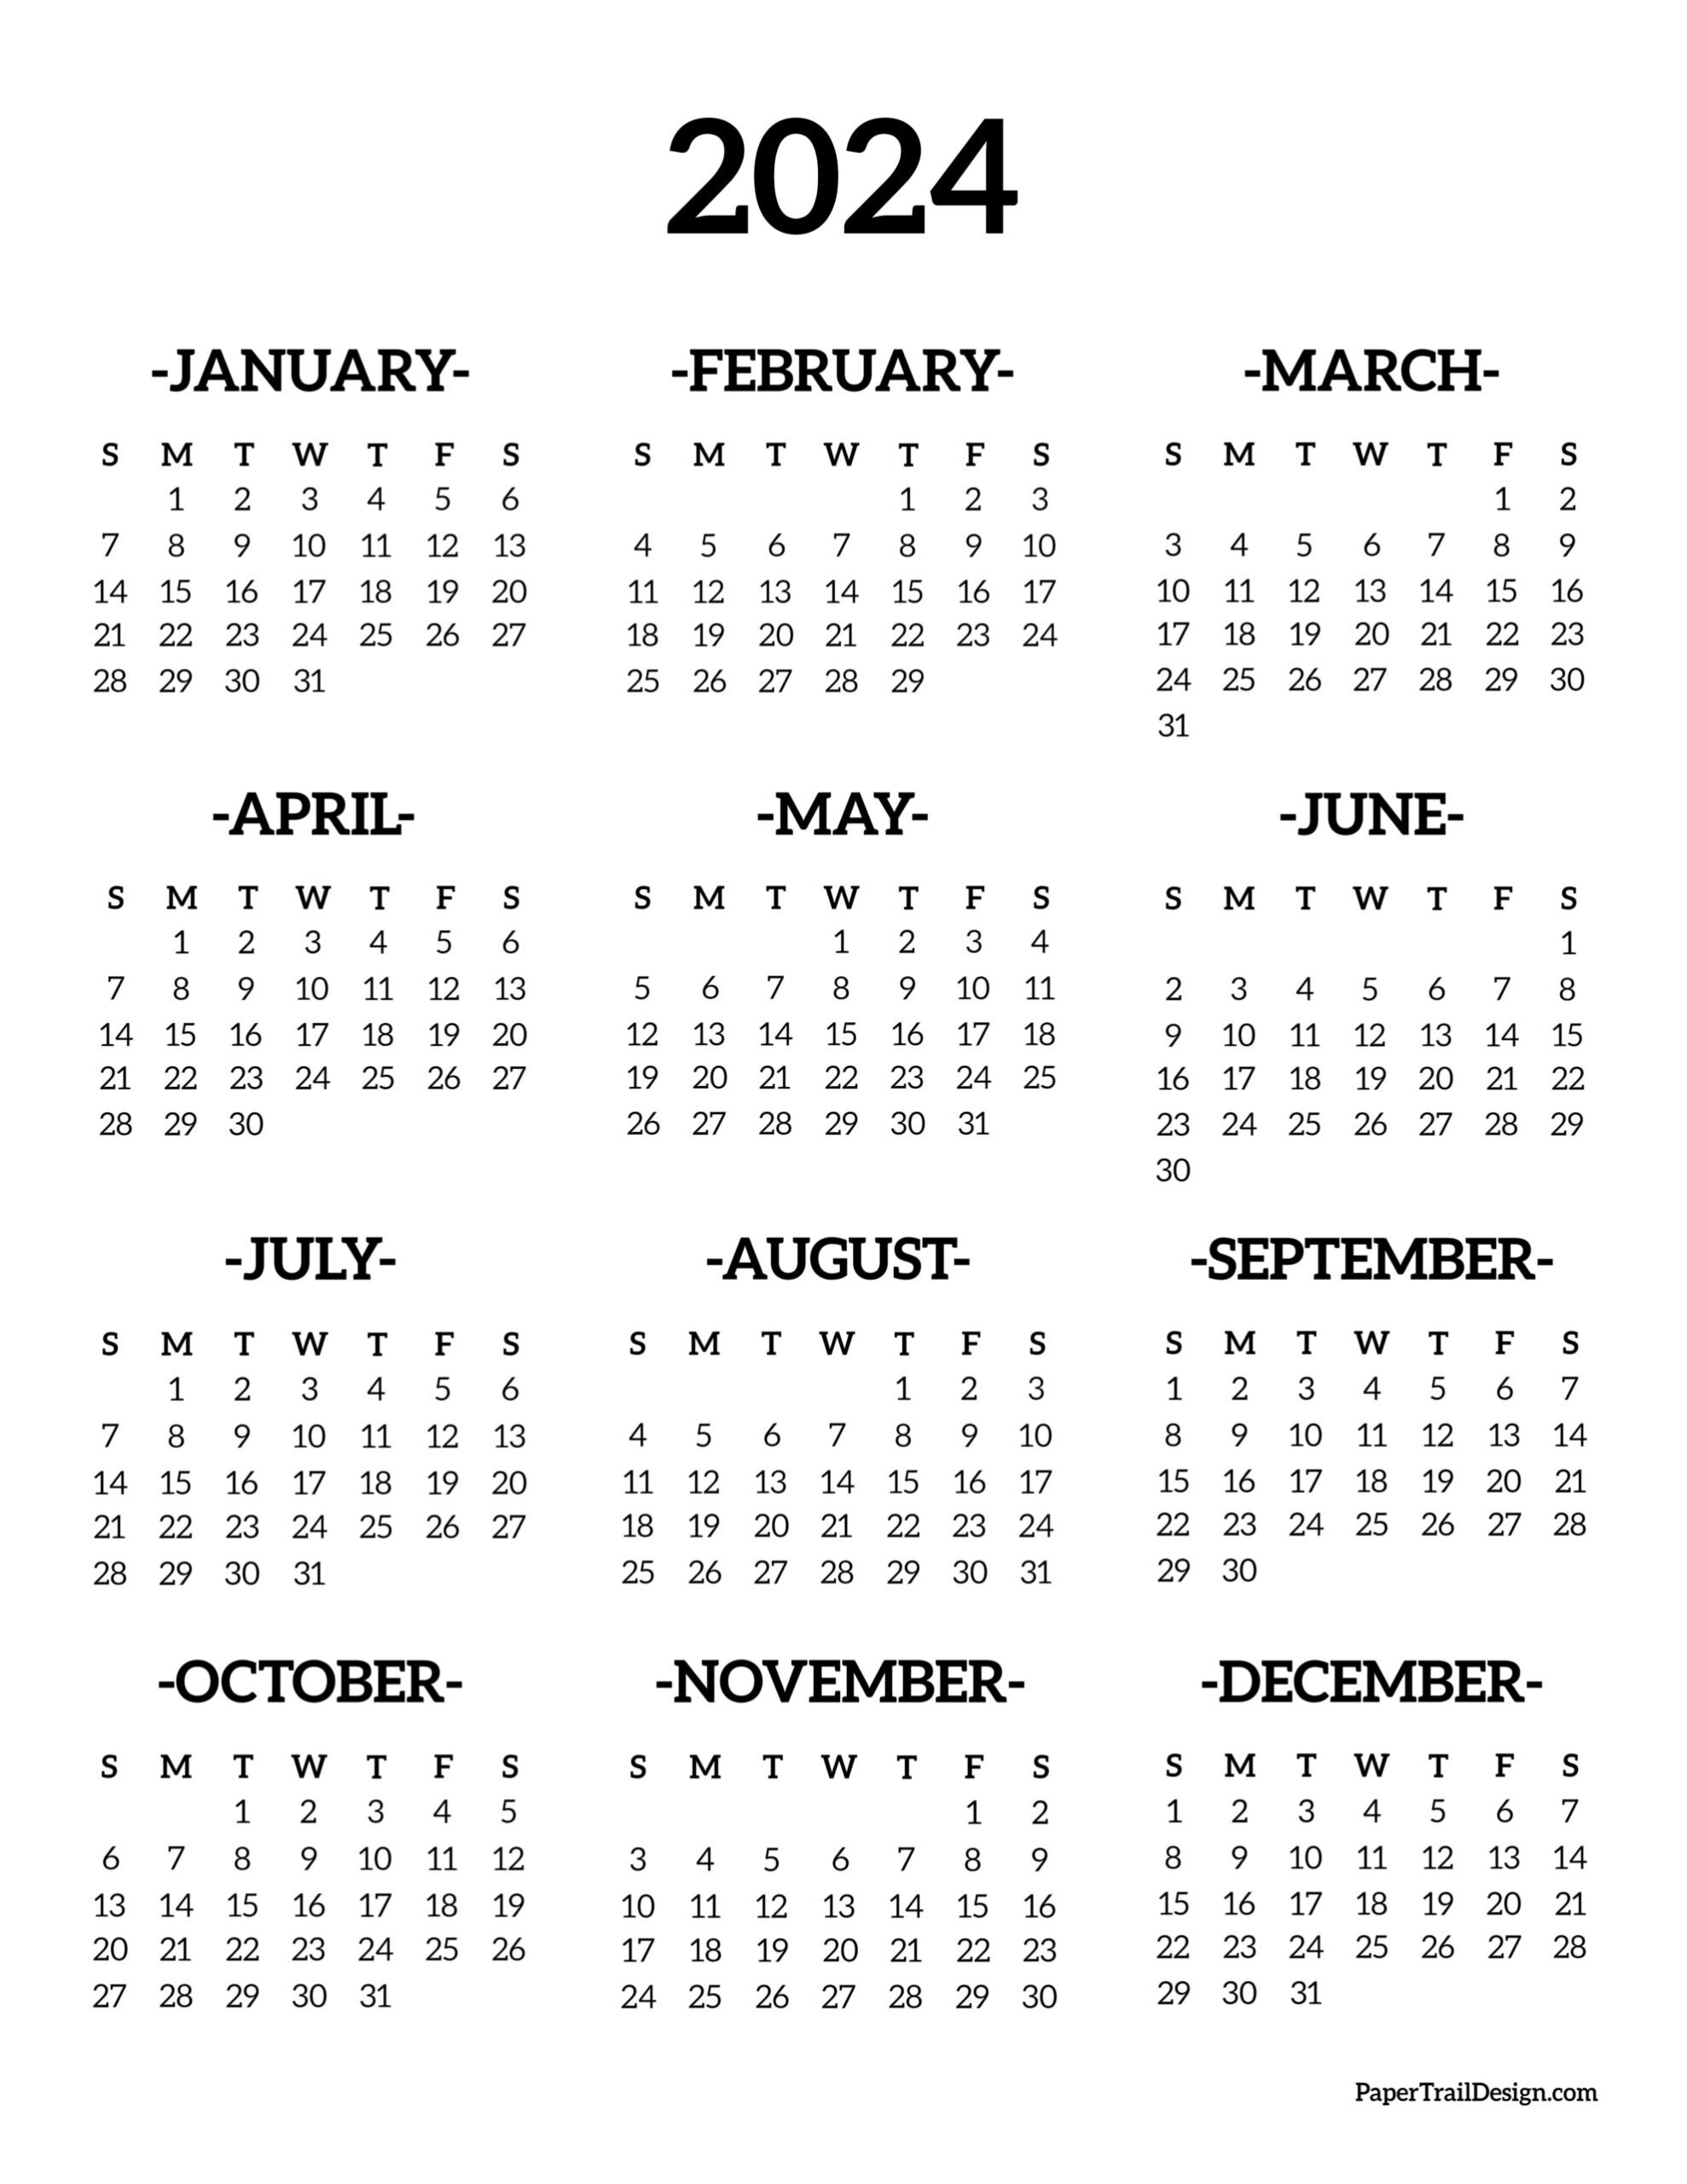 Calendar 2024 Printable One Page - Paper Trail Design | Free Printable 2024 Calendar Printable